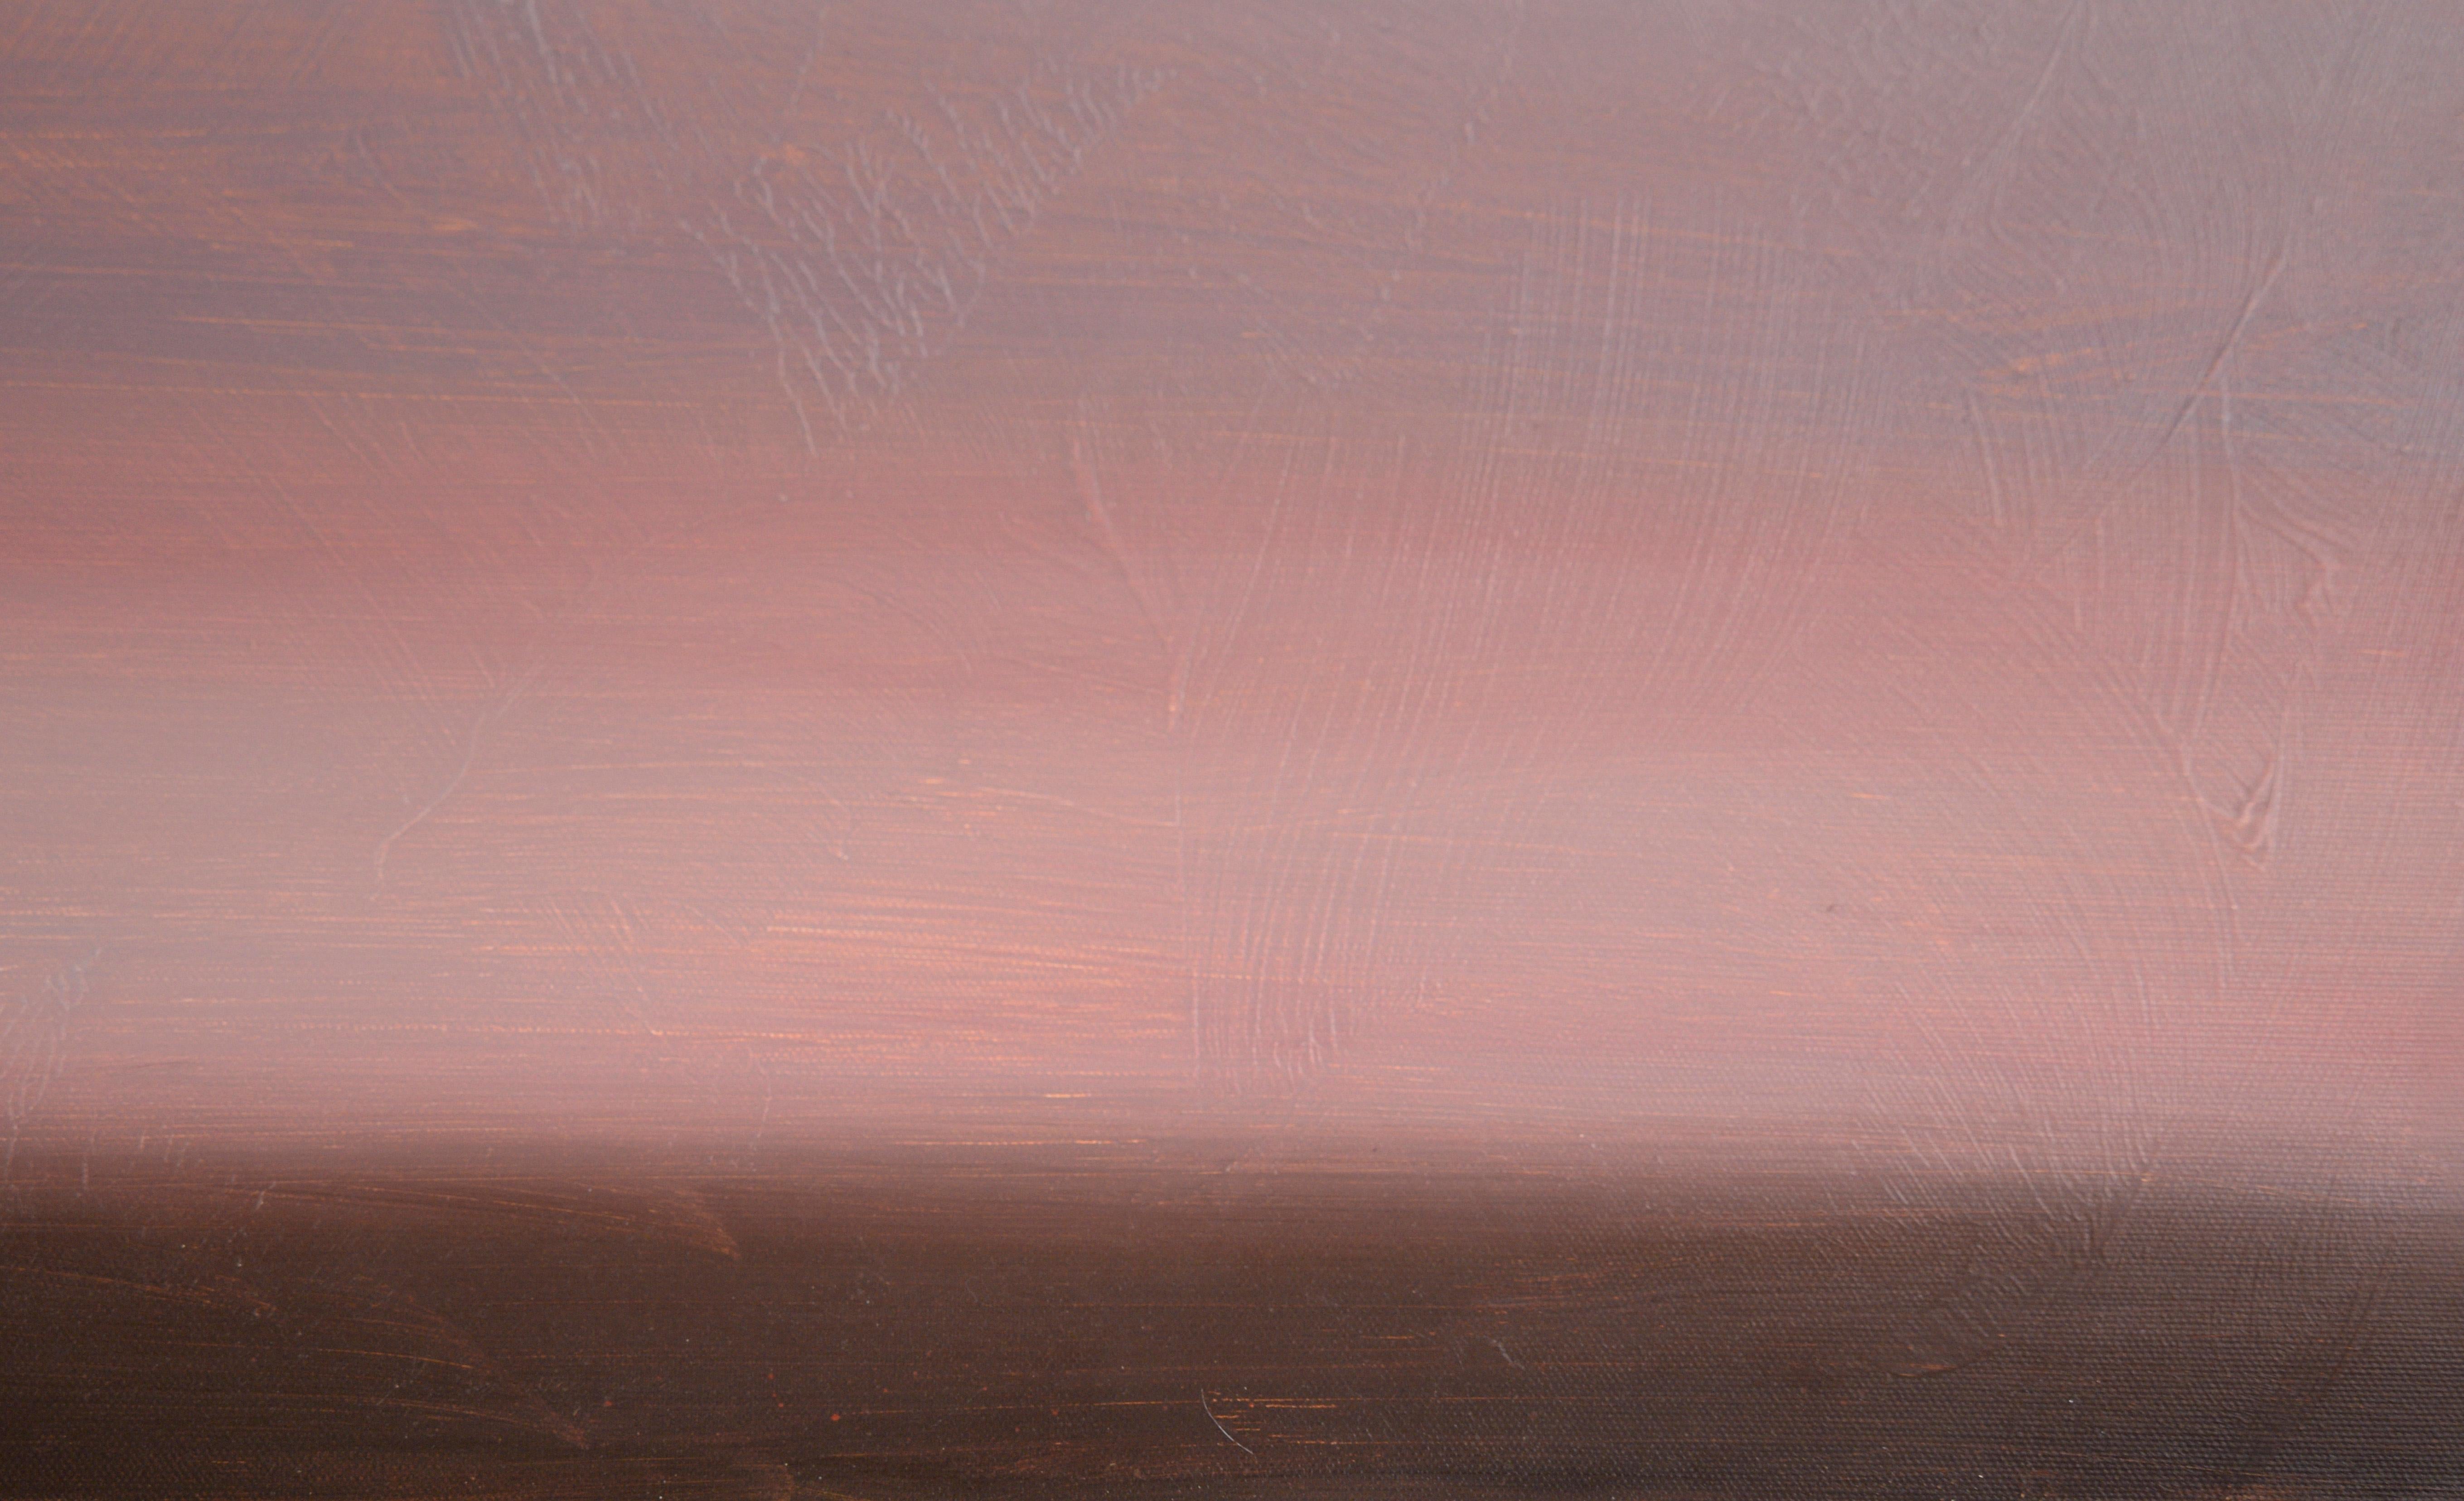 Hazy Purple and Pink Minimalist Landscape in Acrylic on Canvas 1